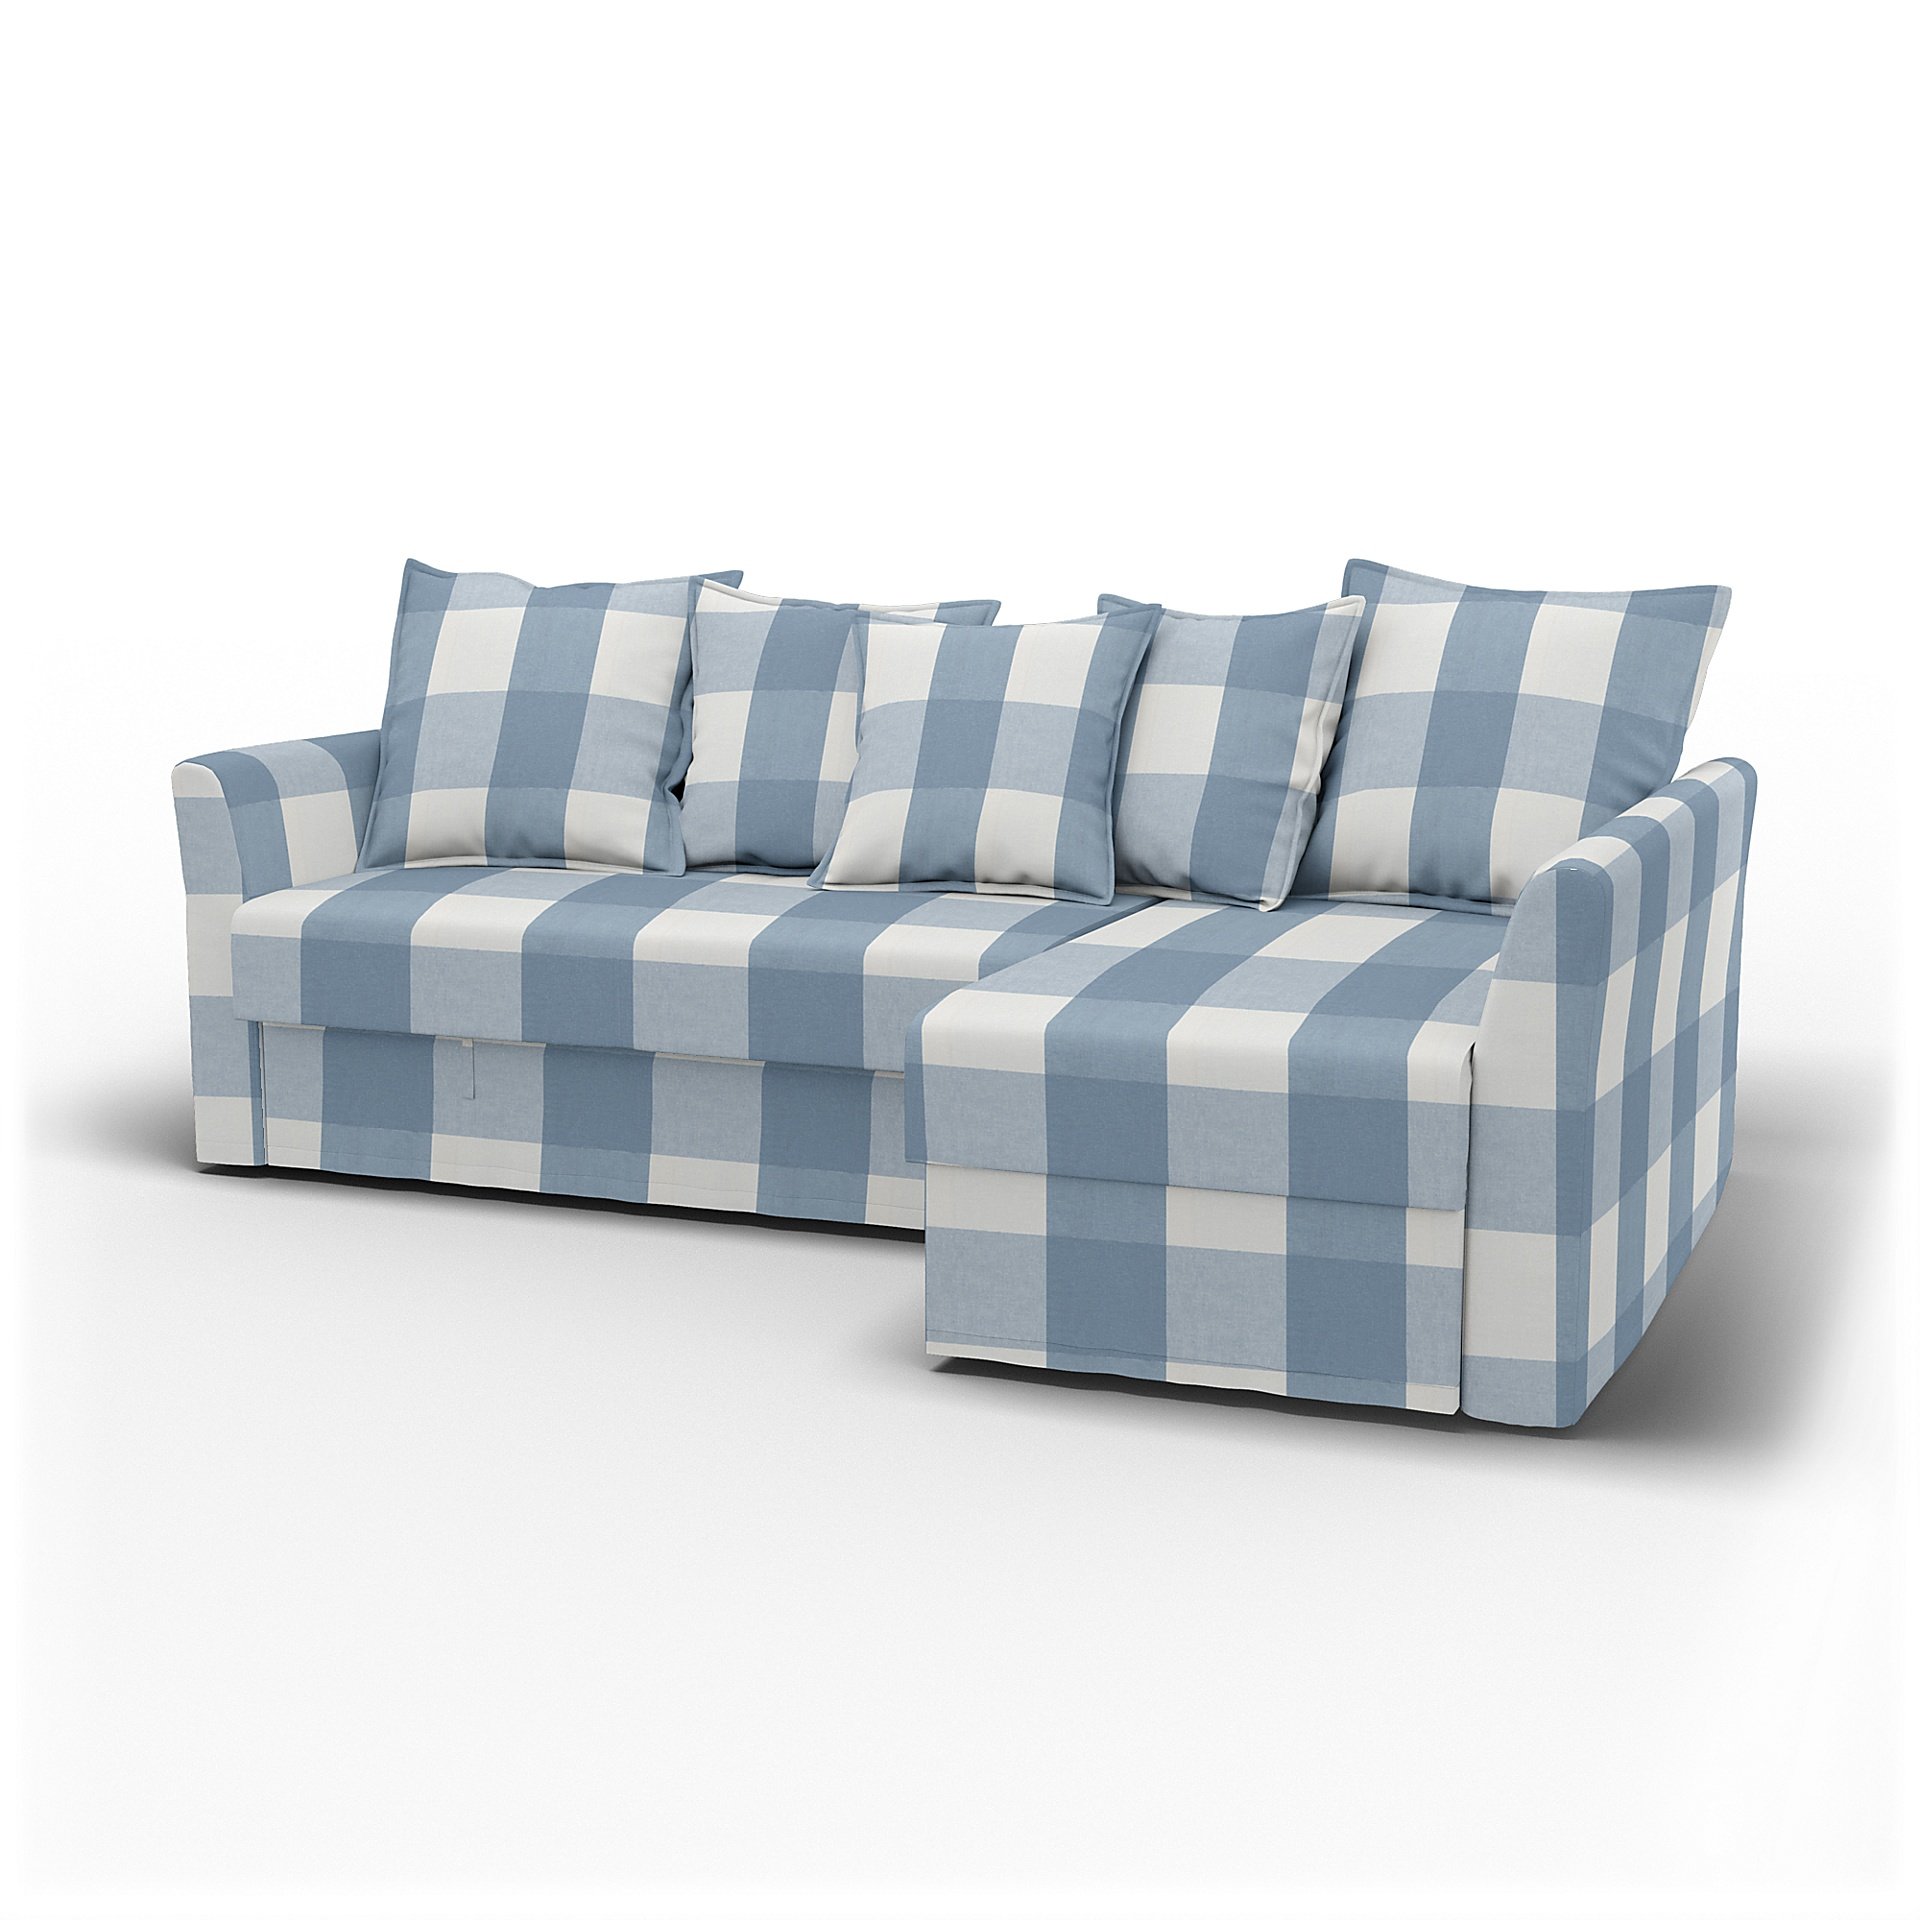 IKEA - Holmsund Sofabed with Chaiselongue, Sky Blue, Linen - Bemz